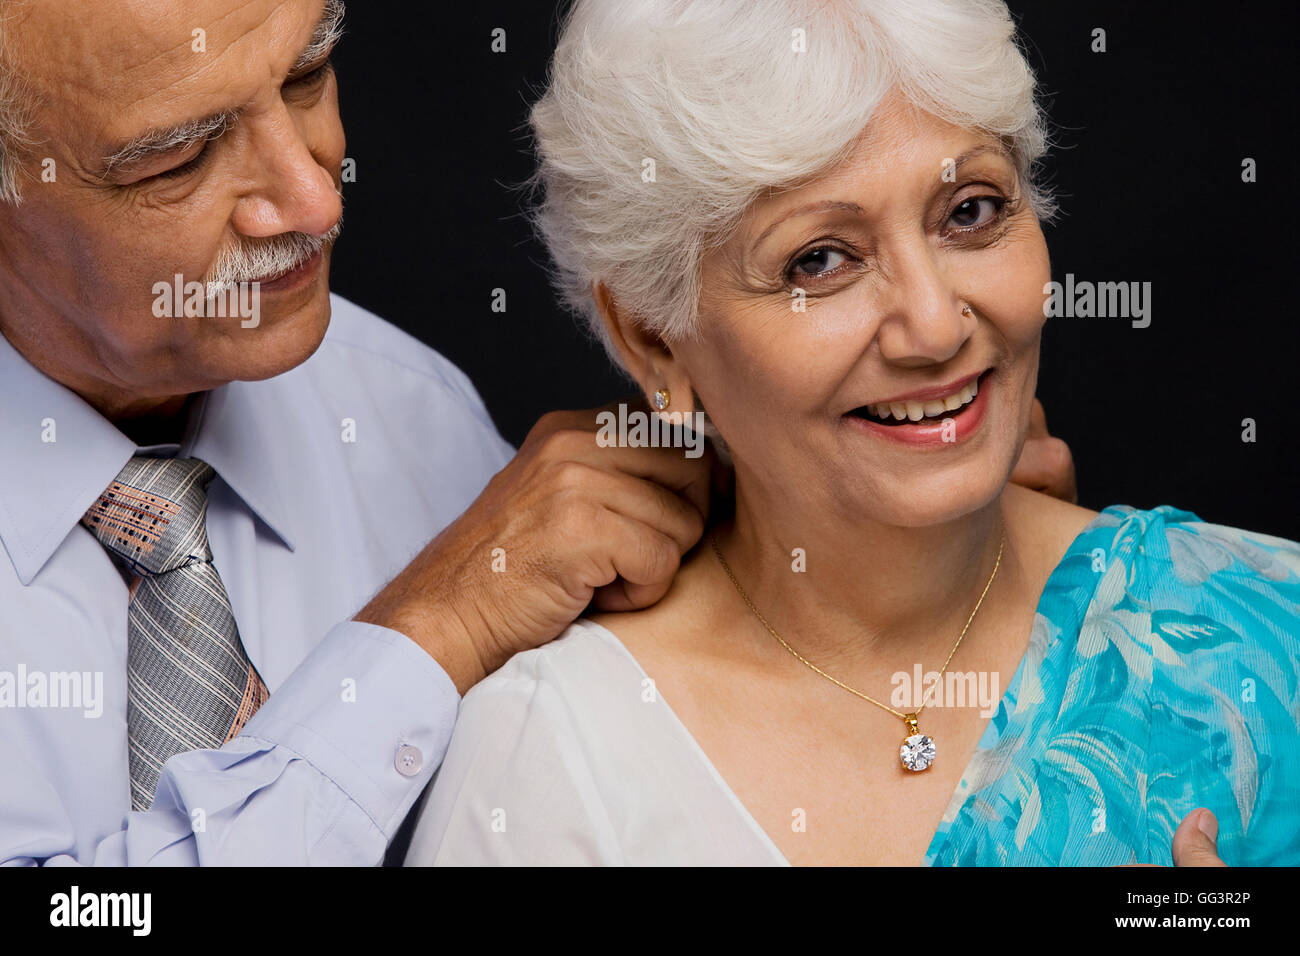 Man putting a necklace around her neck Stock Photo